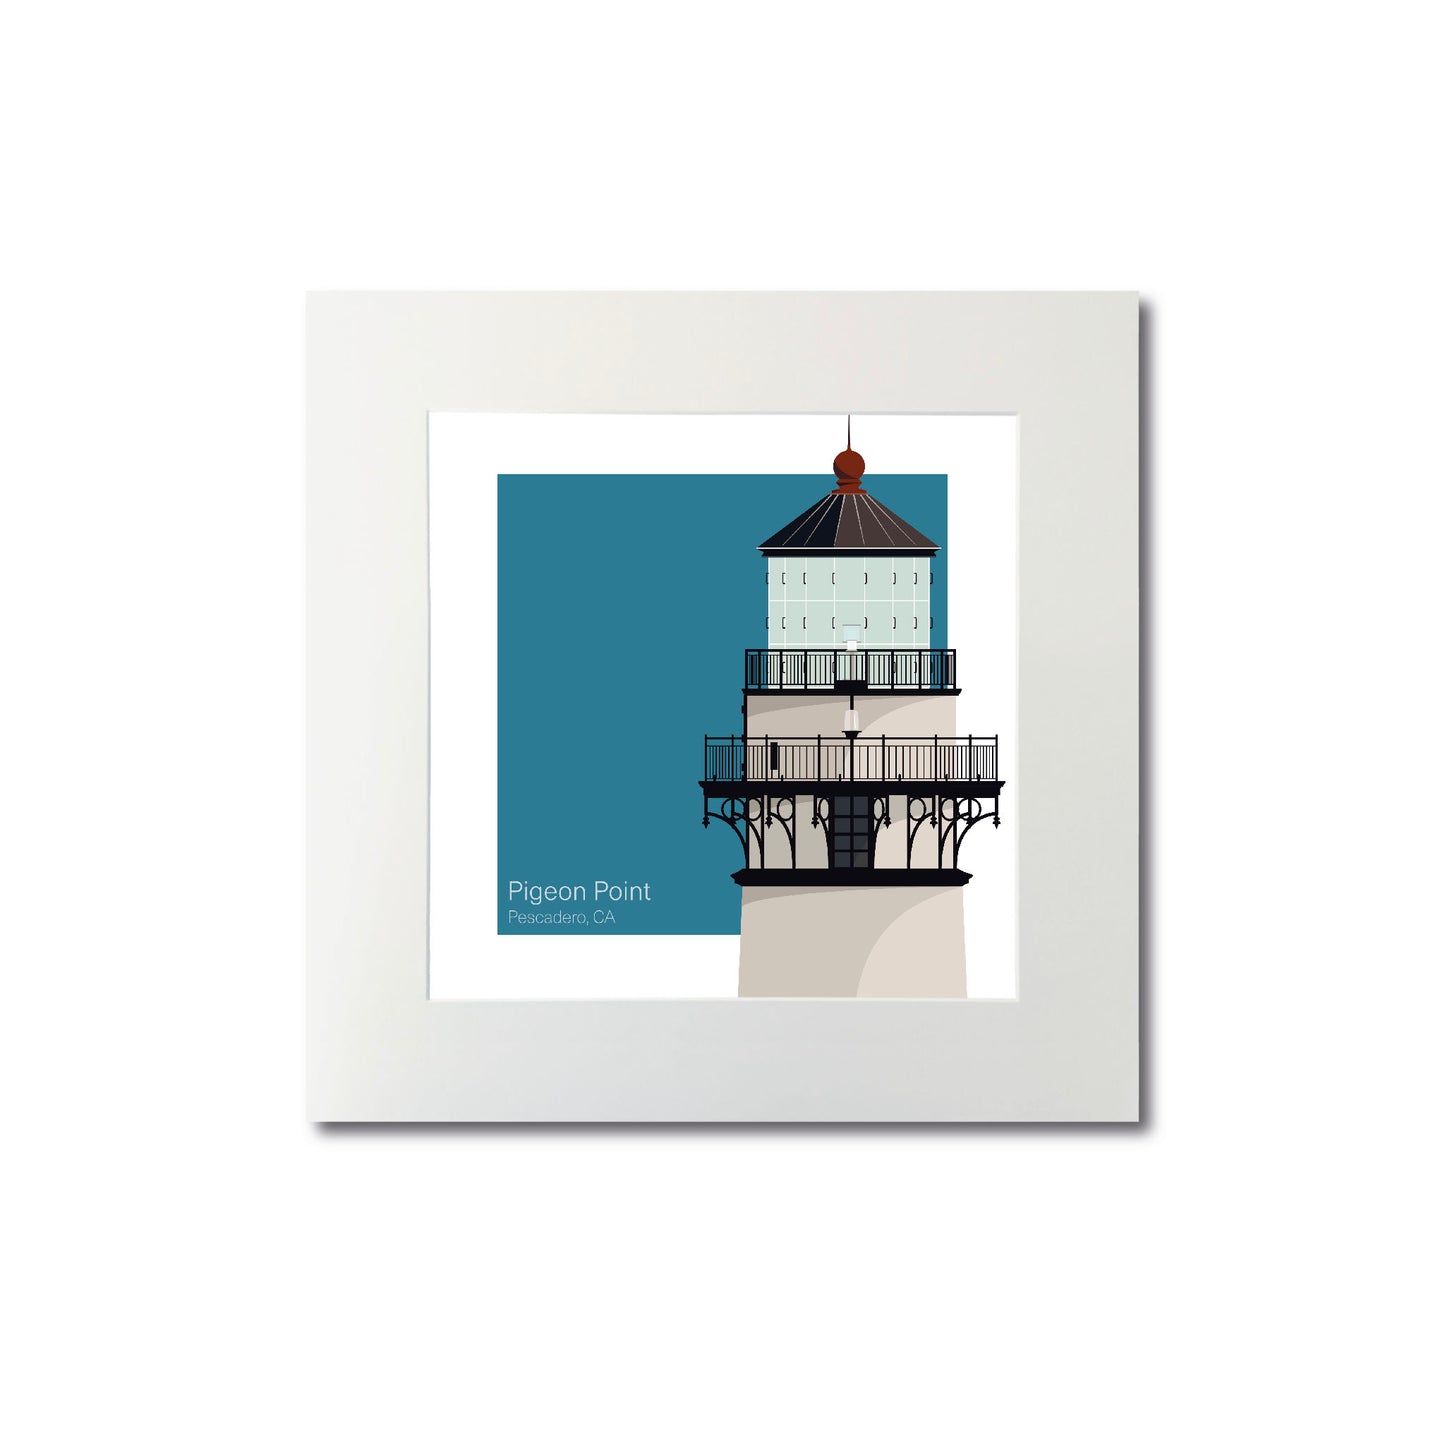 Illustration of the Pigeon Point lighthouse, CA, USA. On a white background with aqua blue square as a backdrop., mounted and measuring 8"x8" (20x20cm).